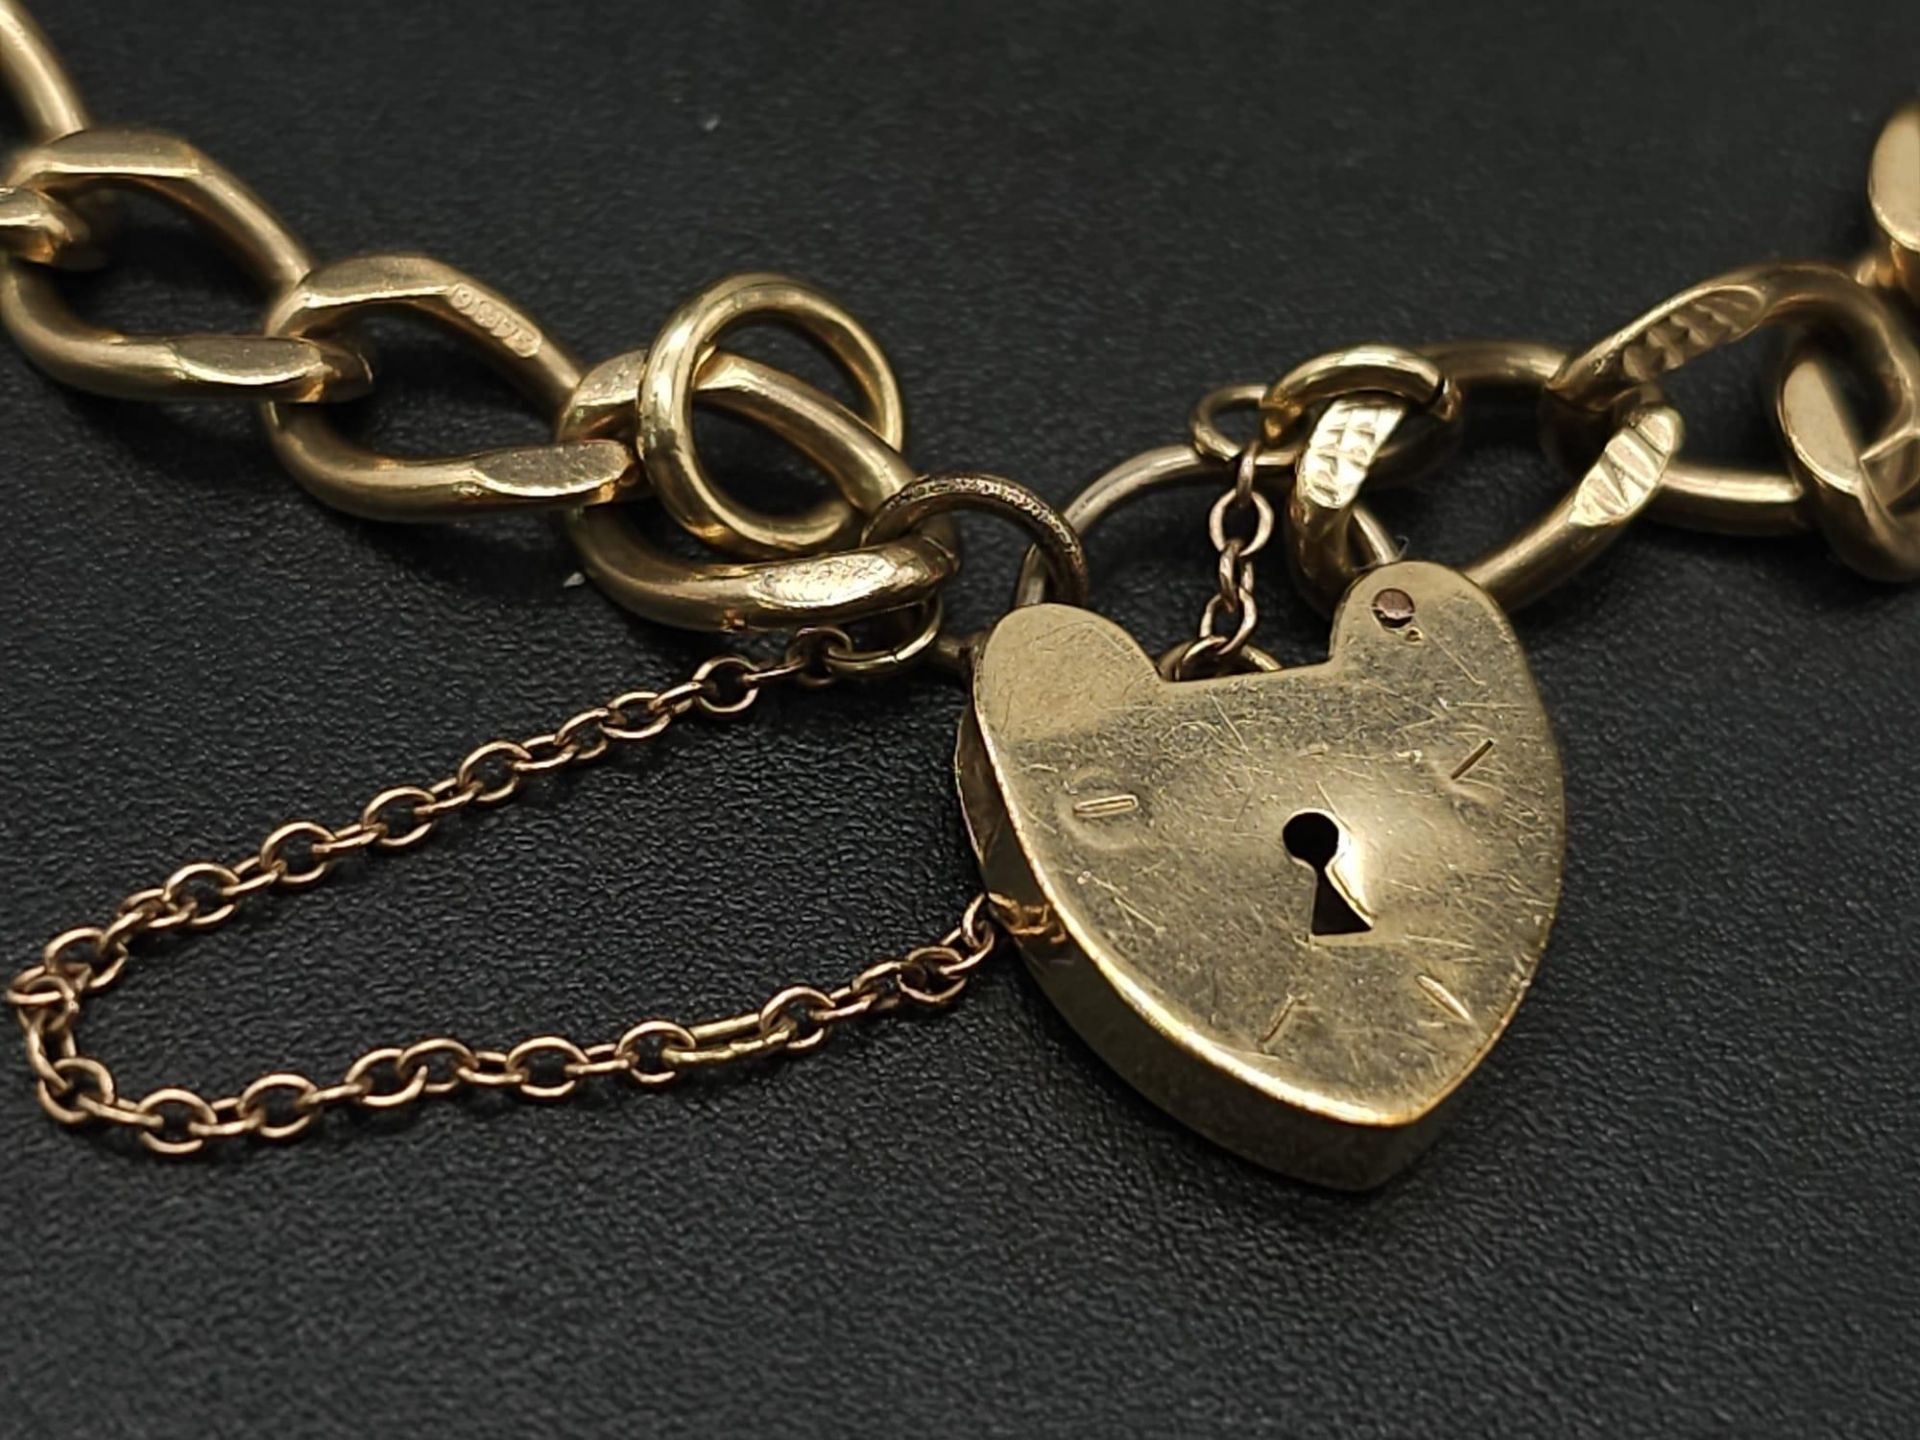 9K YELLOW GOLD CHARM BRACELET WITH PADLOCK CLASP AND SAFETY CHAIN, WEIGHT 11.5G - Image 2 of 10